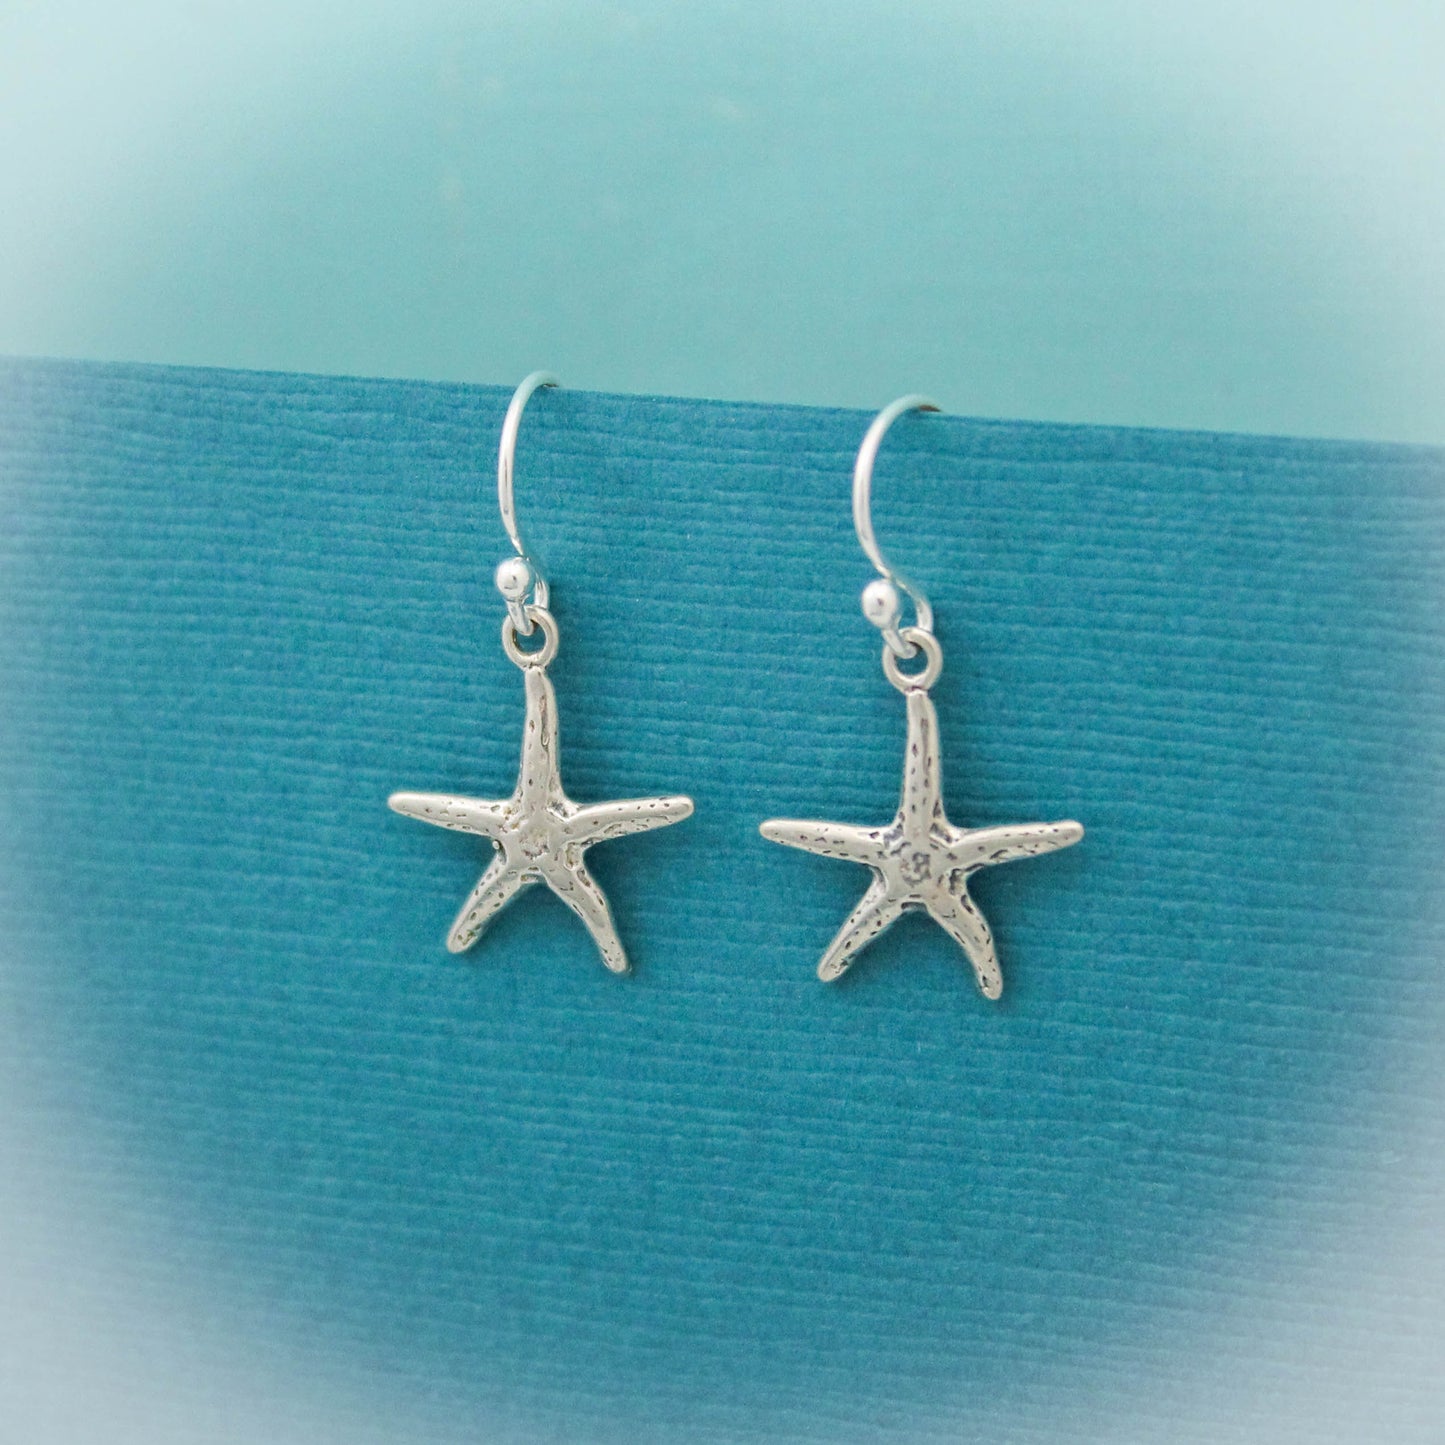 Cute Starfish Earrings, Sterling Silver Starfish Beach Jewelry, Starfish Jewelry, Sterling Silver Starfish Shore Jewelry Gift, Gifts for Her